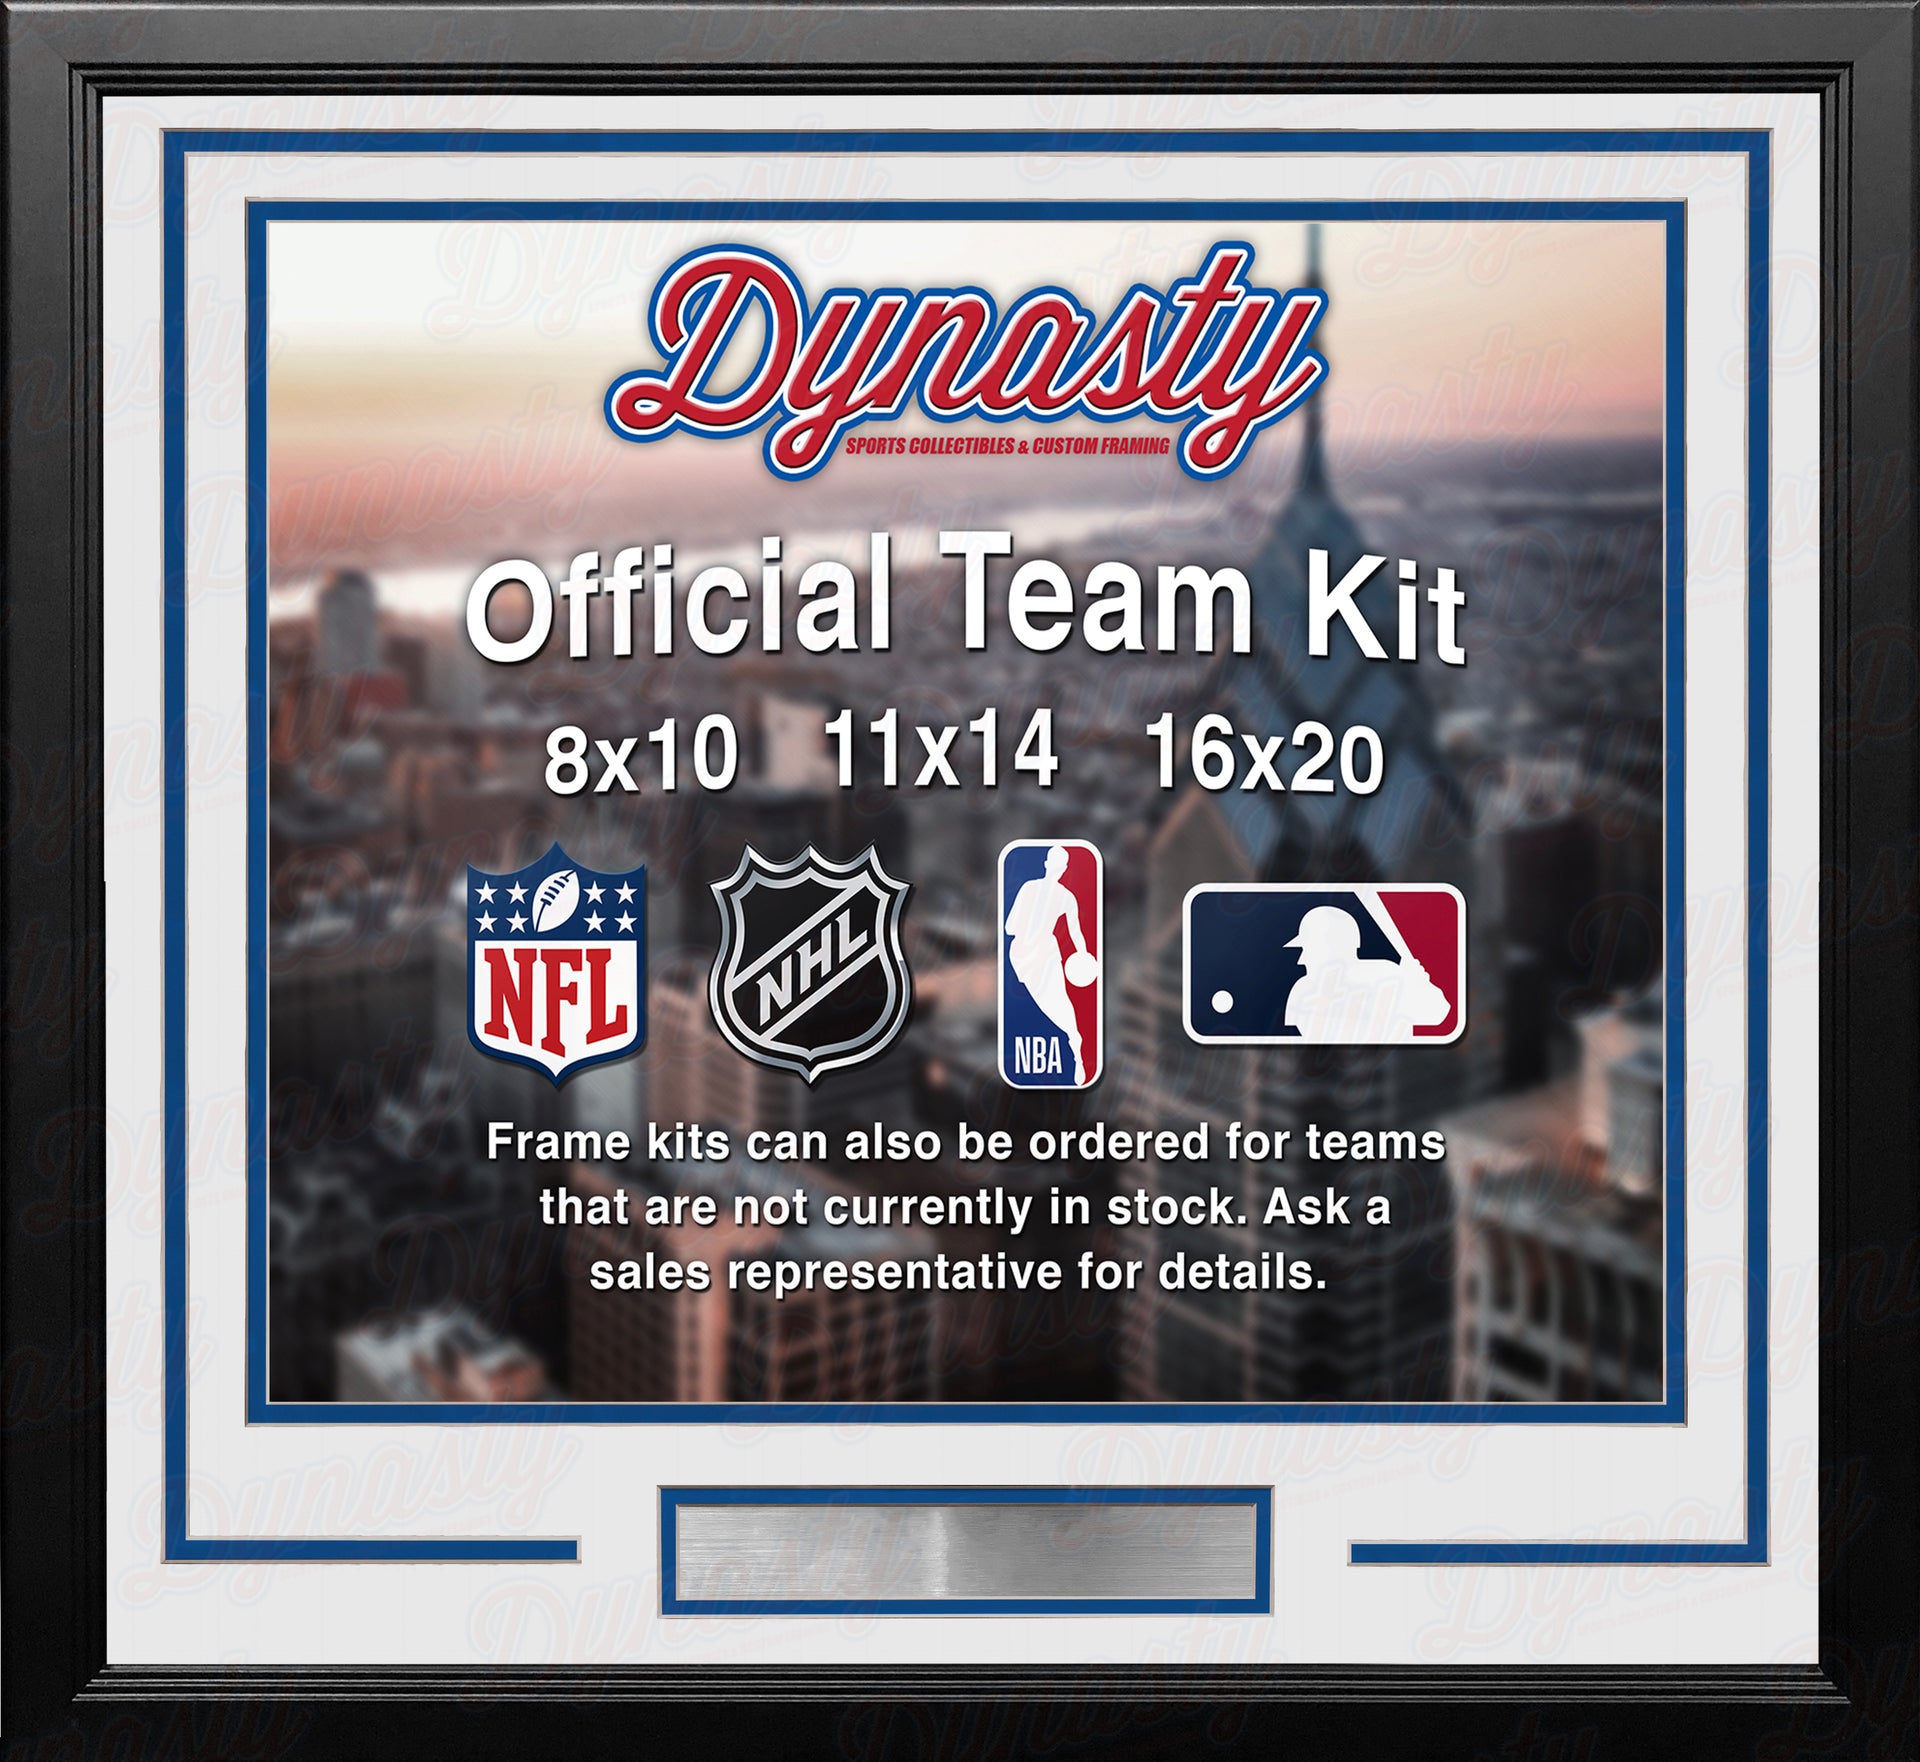 Los Angeles Rams Custom NFL Football 16x20 Picture Frame Kit (Multiple Colors) - Dynasty Sports & Framing 